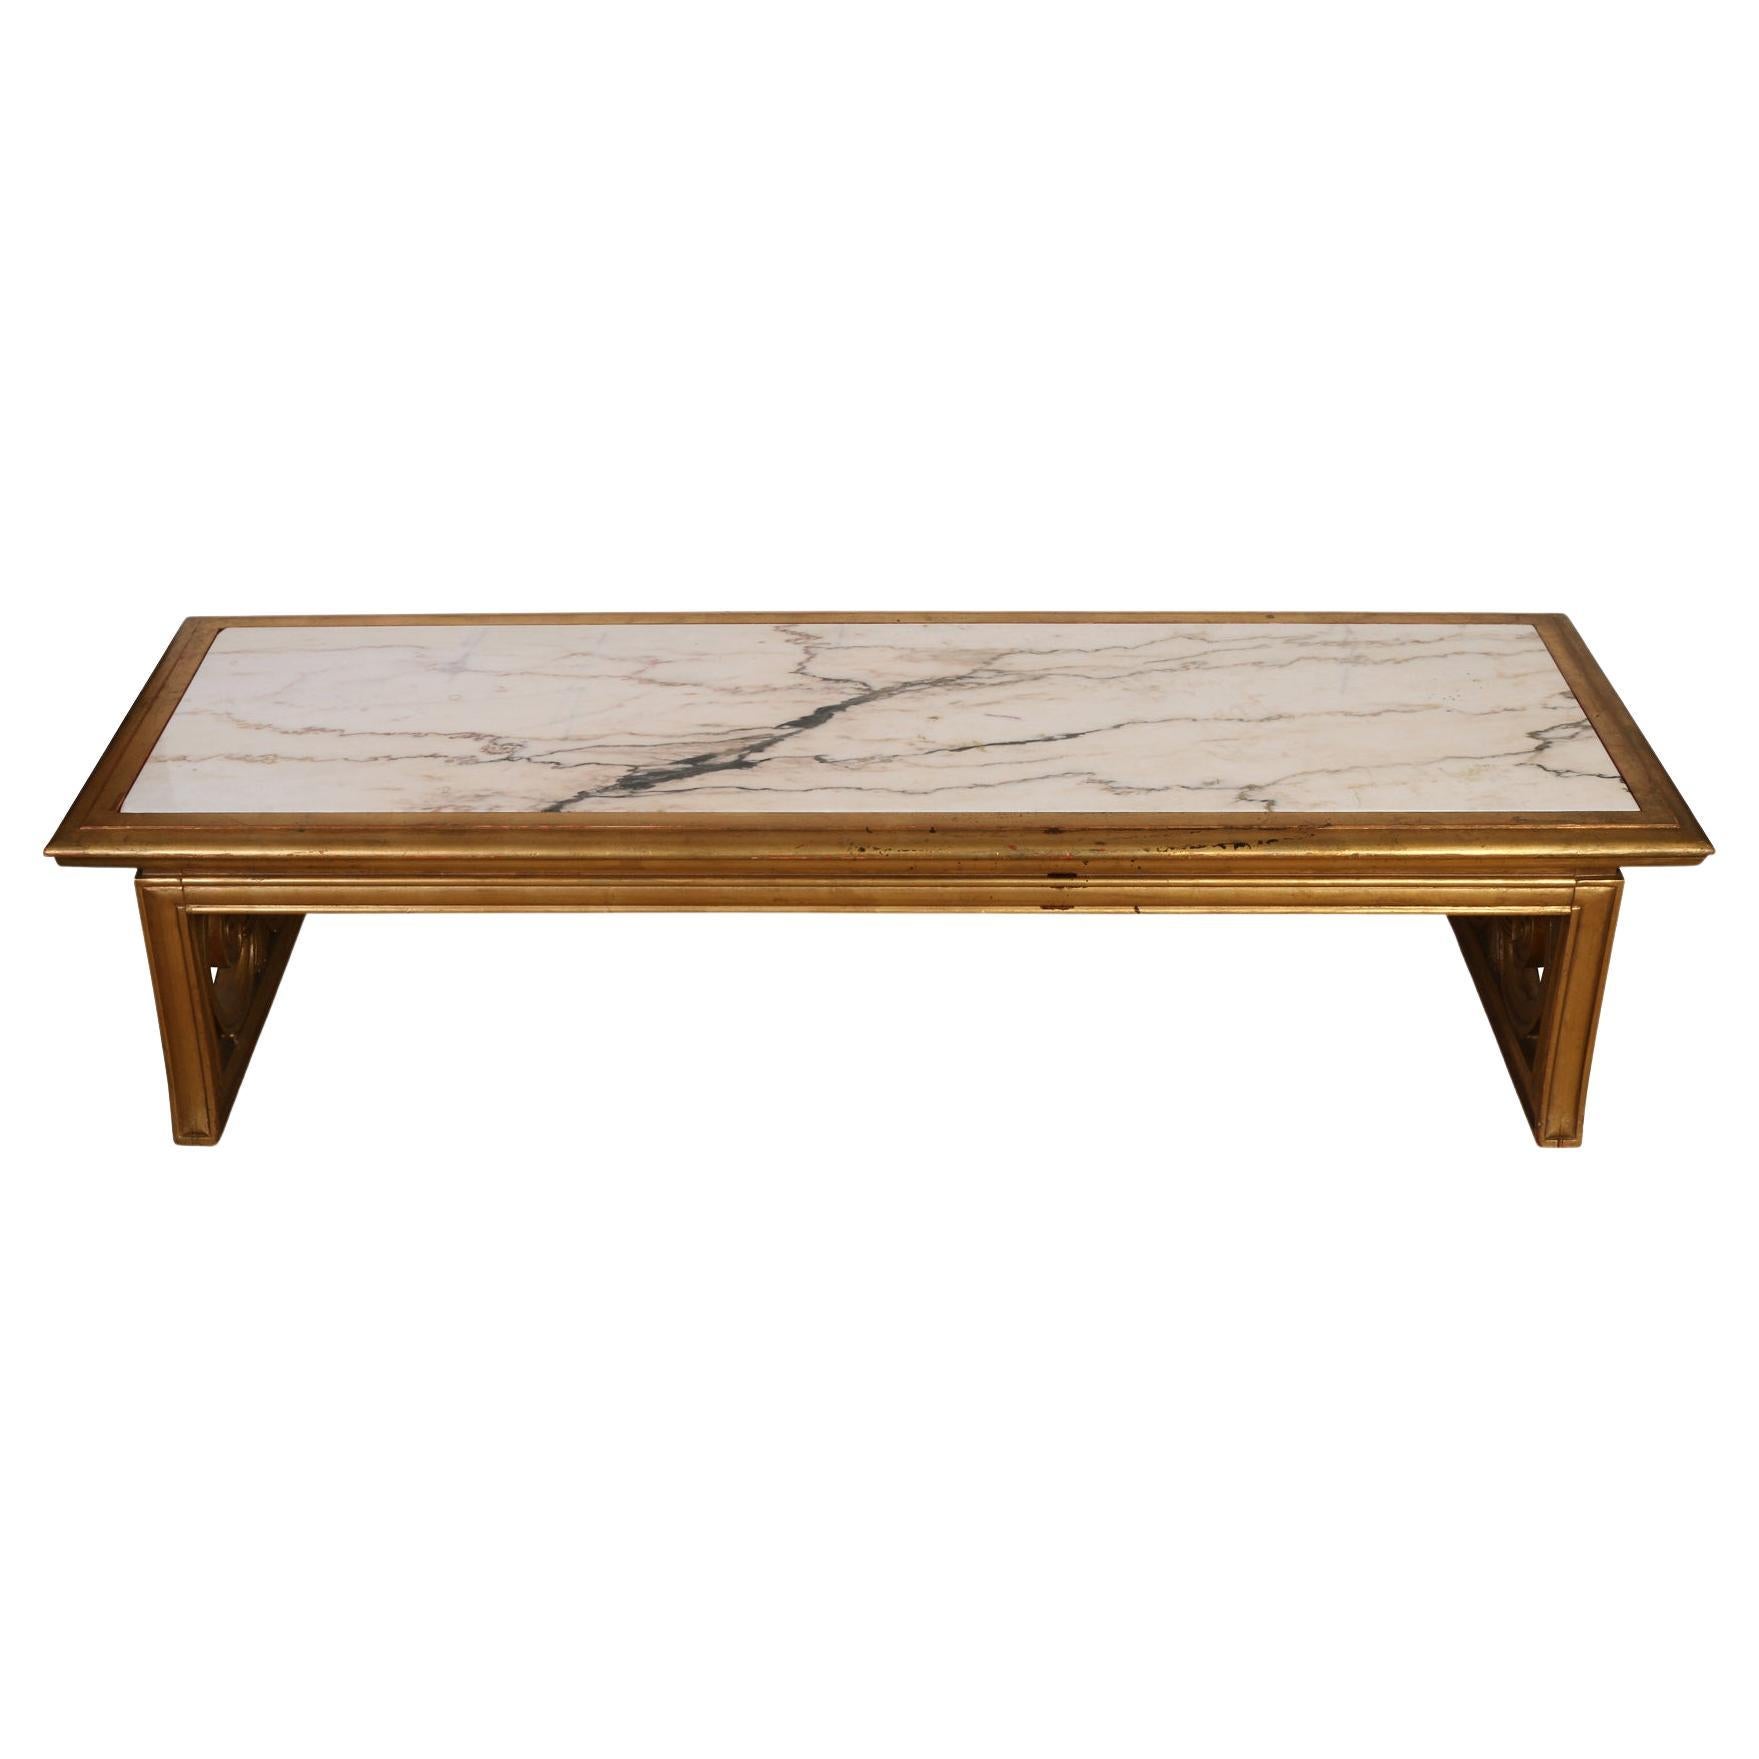 Vintage Giltwood Coffee Table with Marble Top